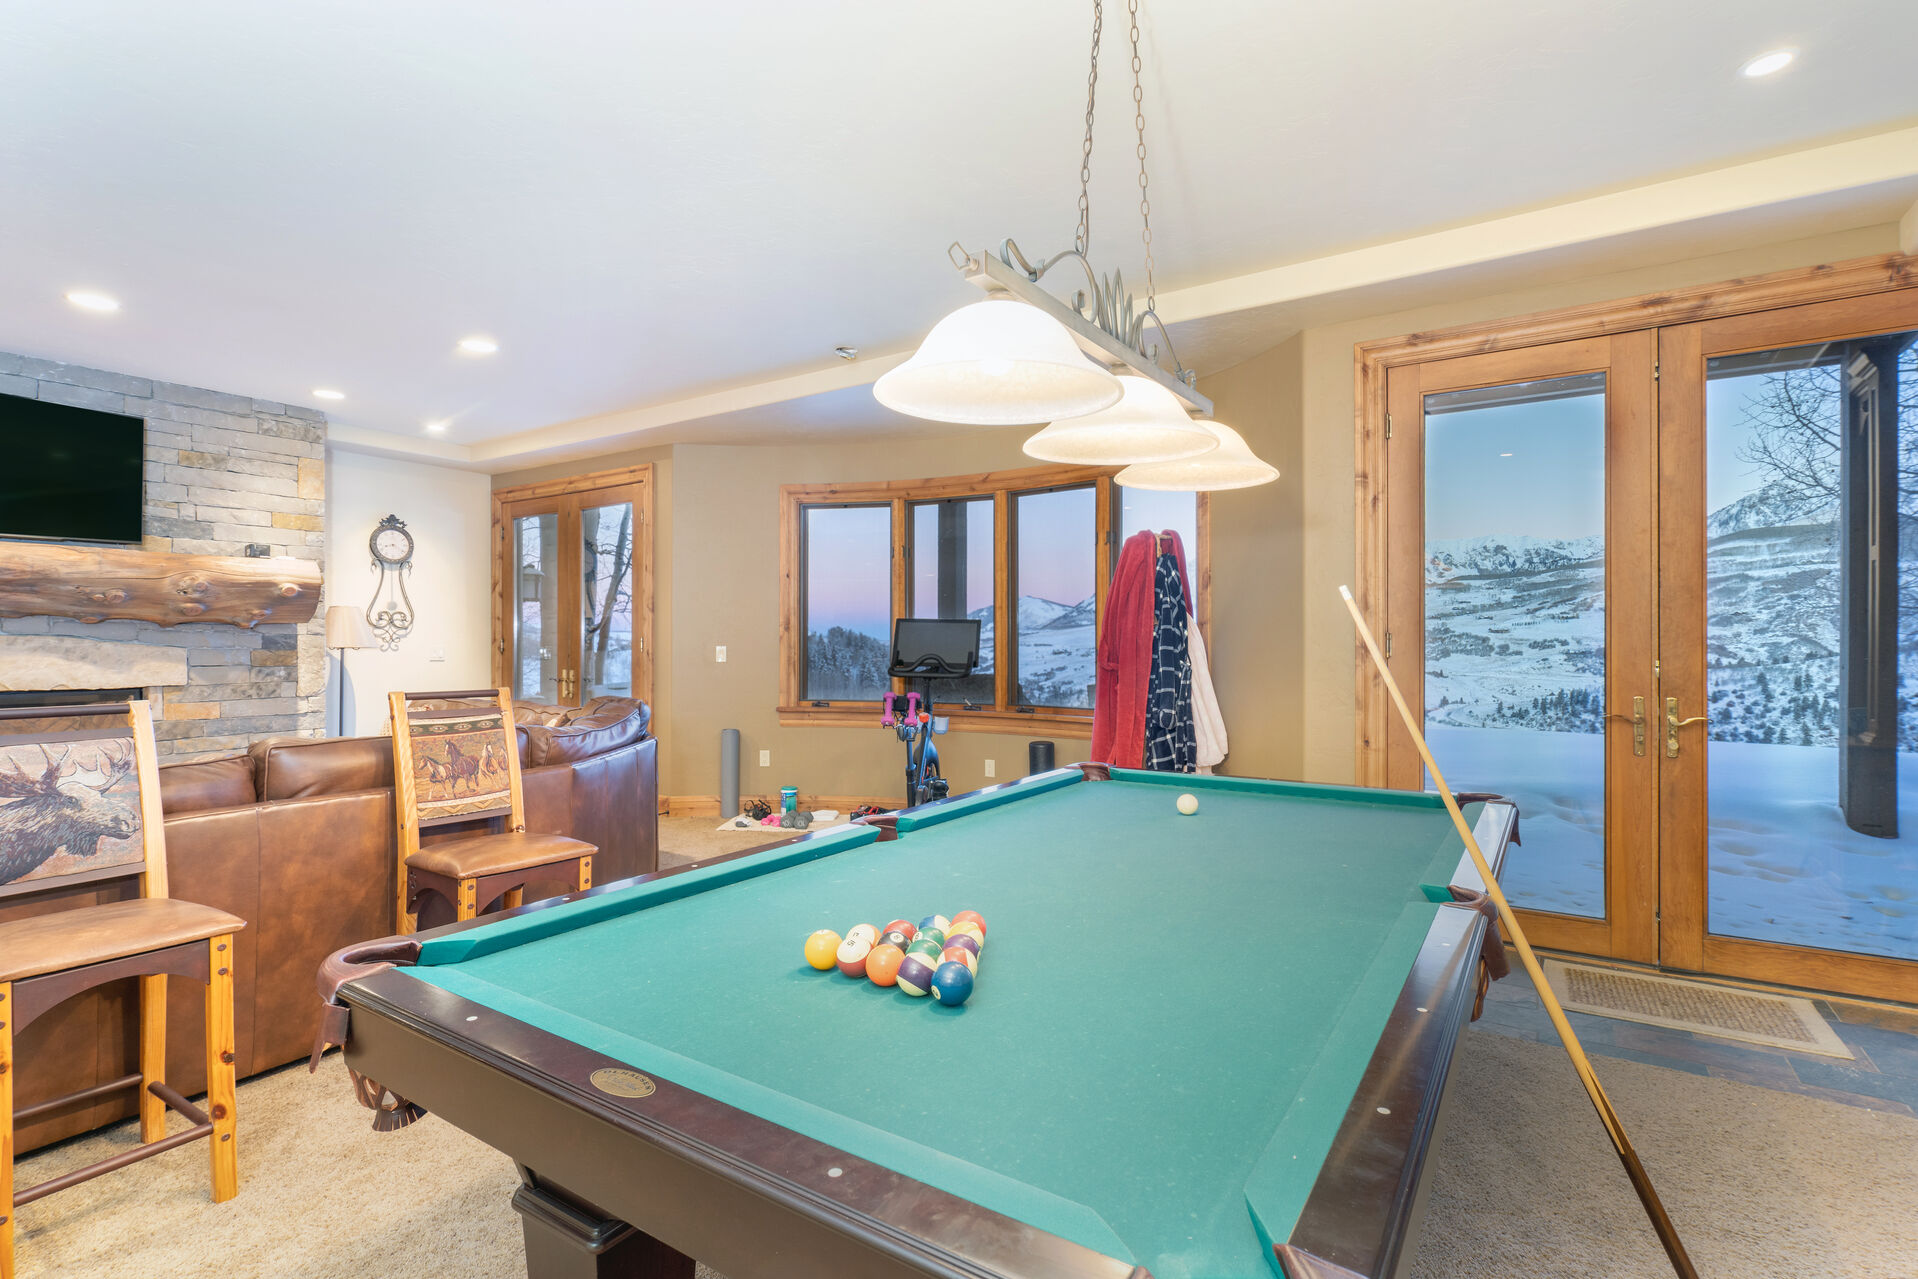 The pool table of this Telluride golf rental.